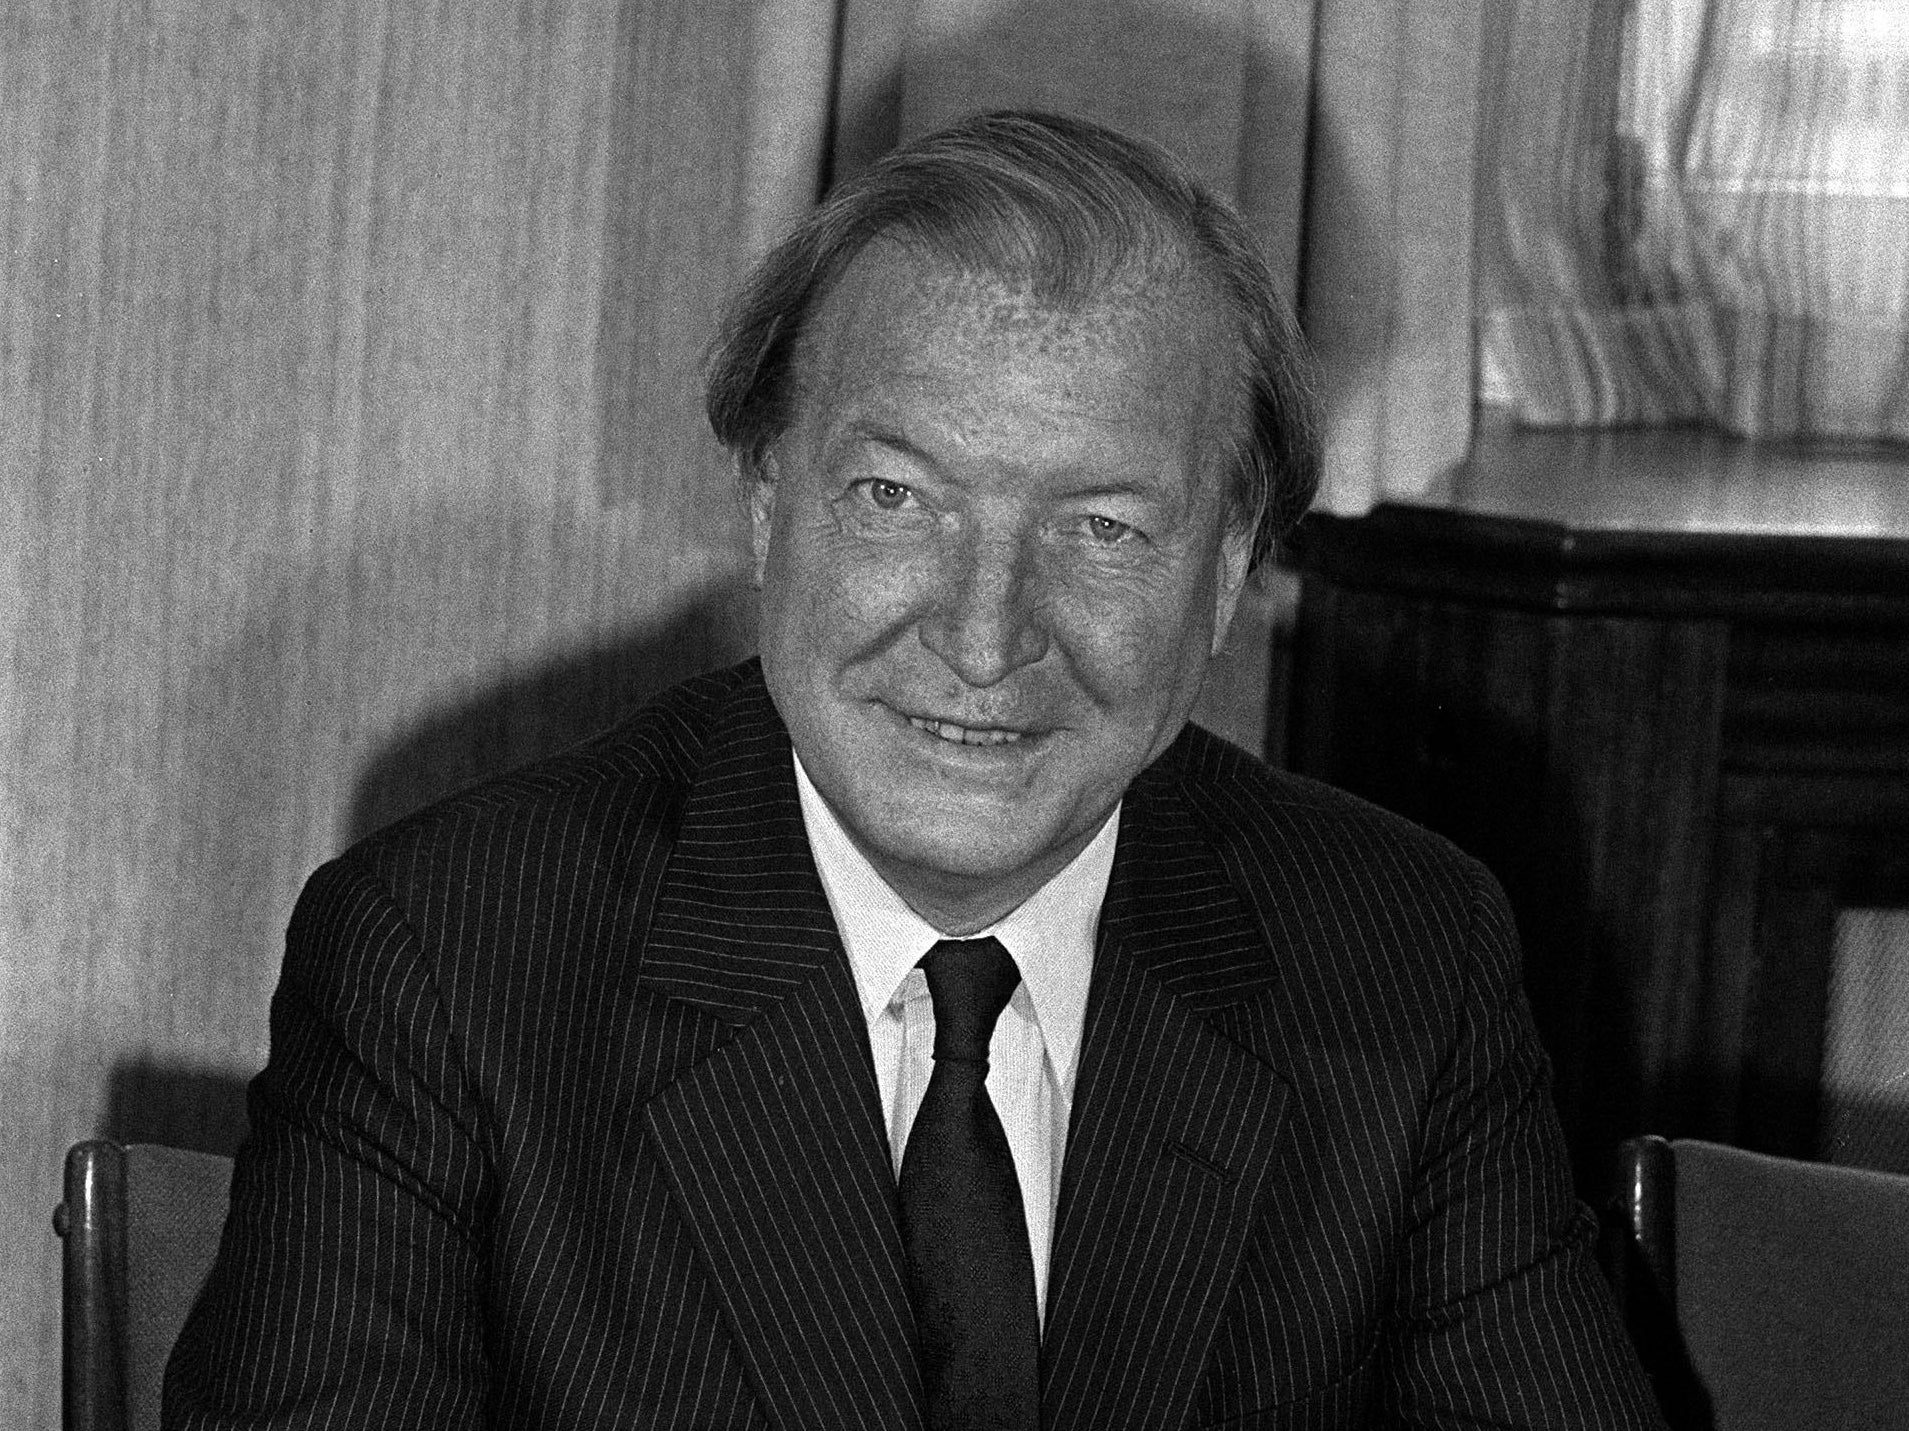 The Ulster Volunteer Force wrote to Irish Prime Minister Charles Haughey claiming MI5 had asked them to assassinate him